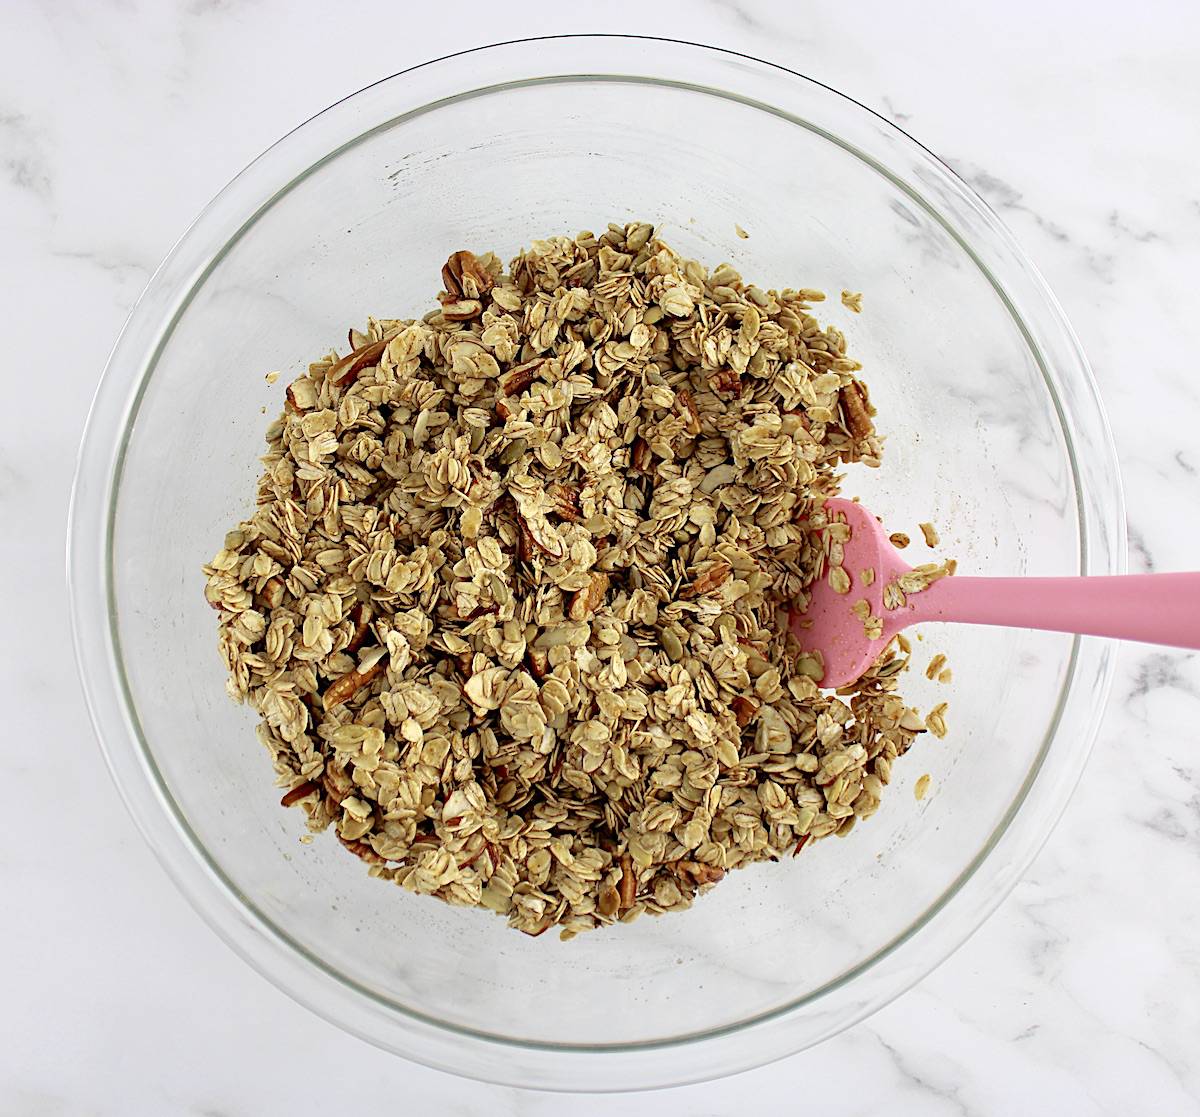 Homemade Granola unbaked in glass bowl being mixed with pink spatula